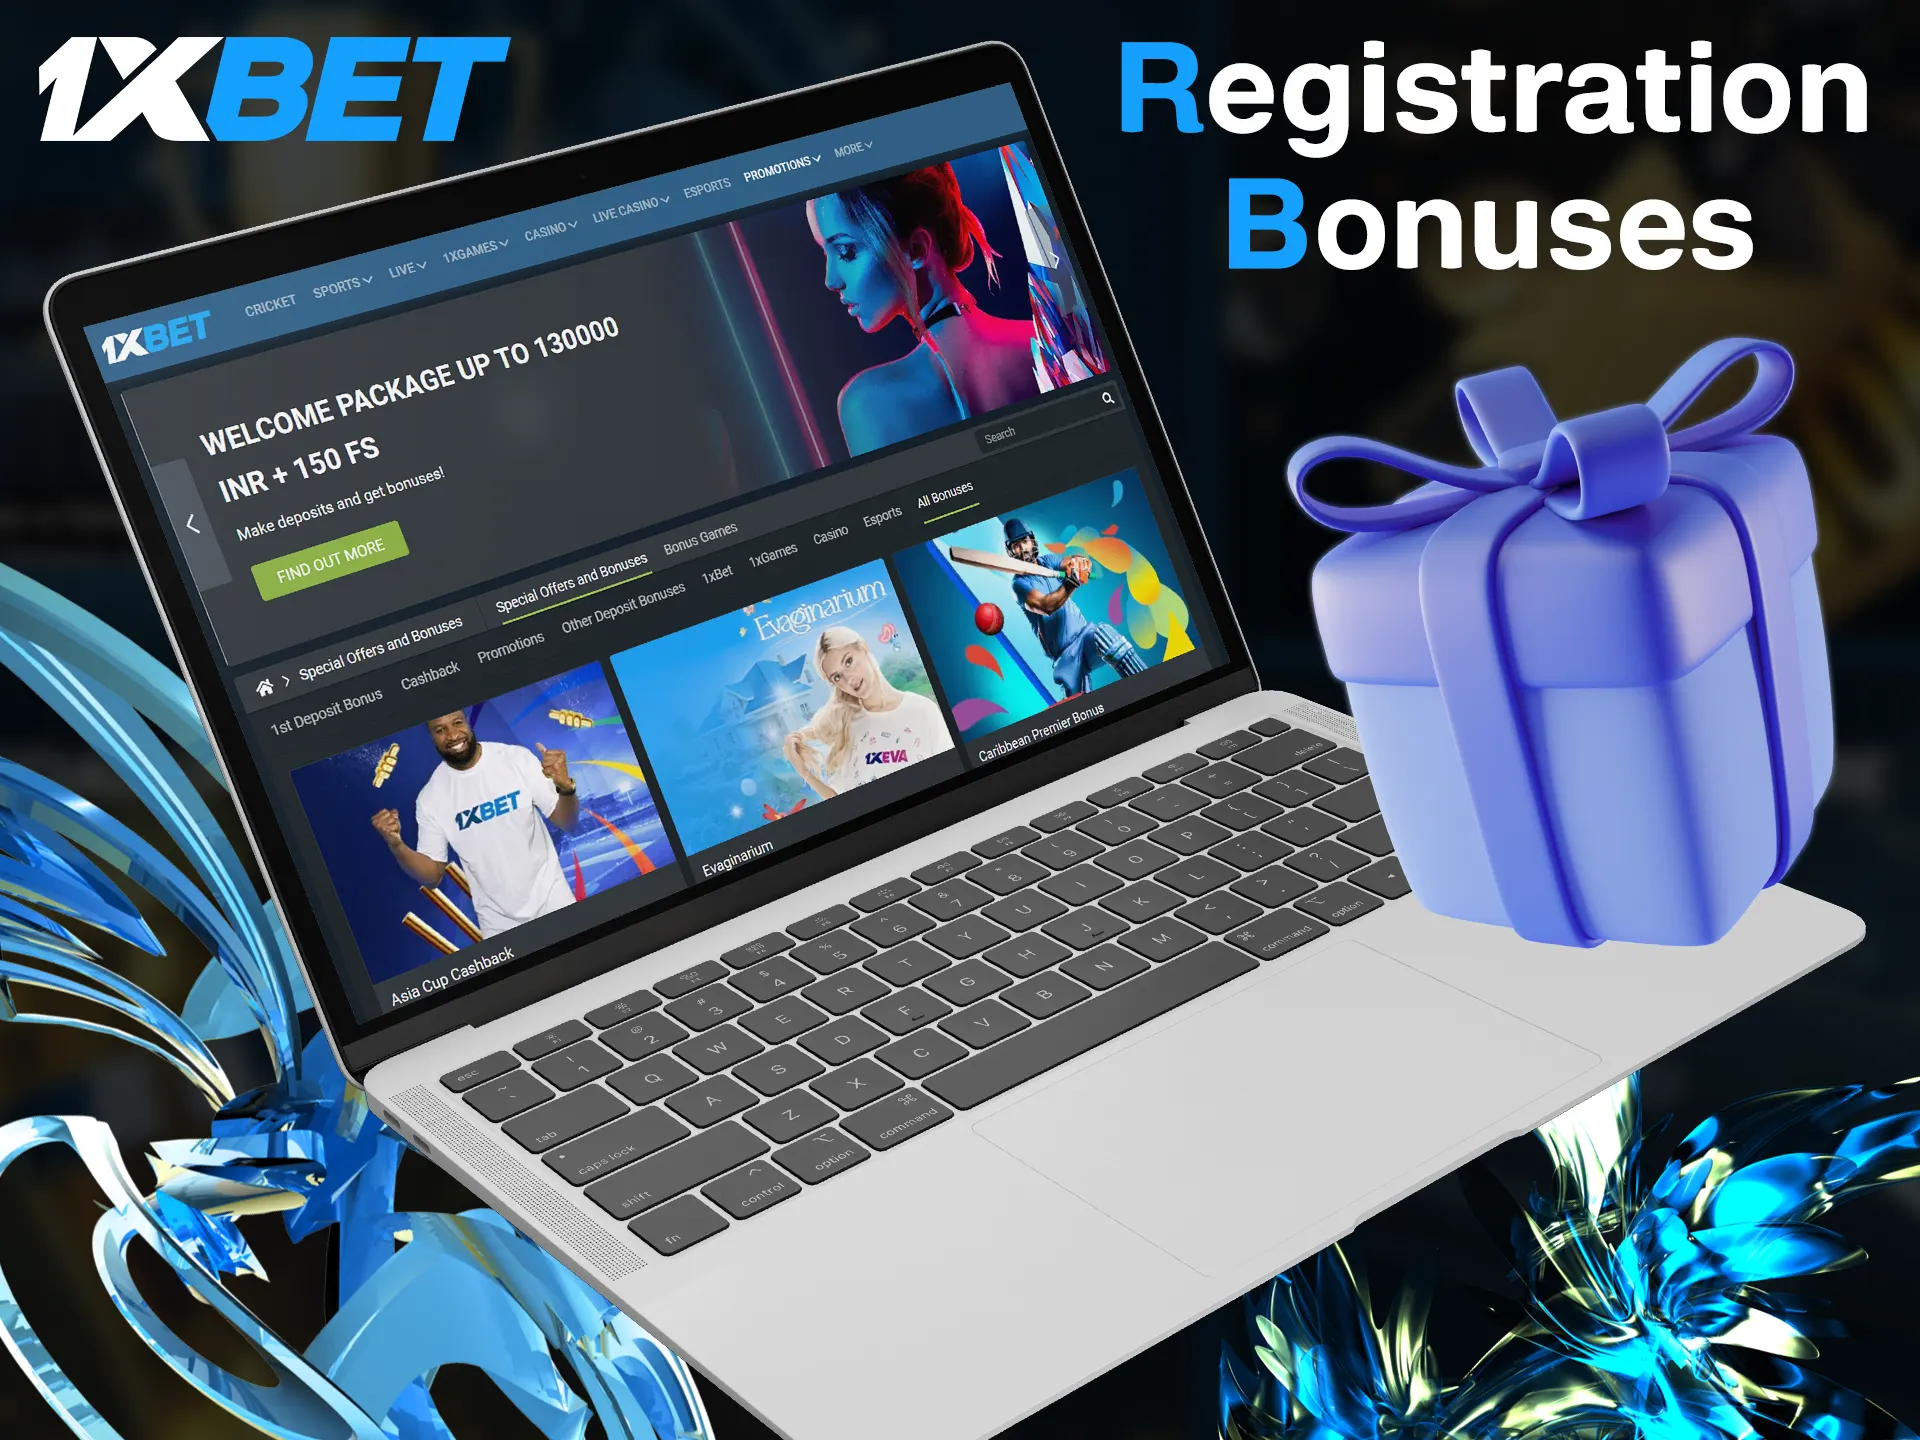 Claim the 1xbet registration bonus after making new account.